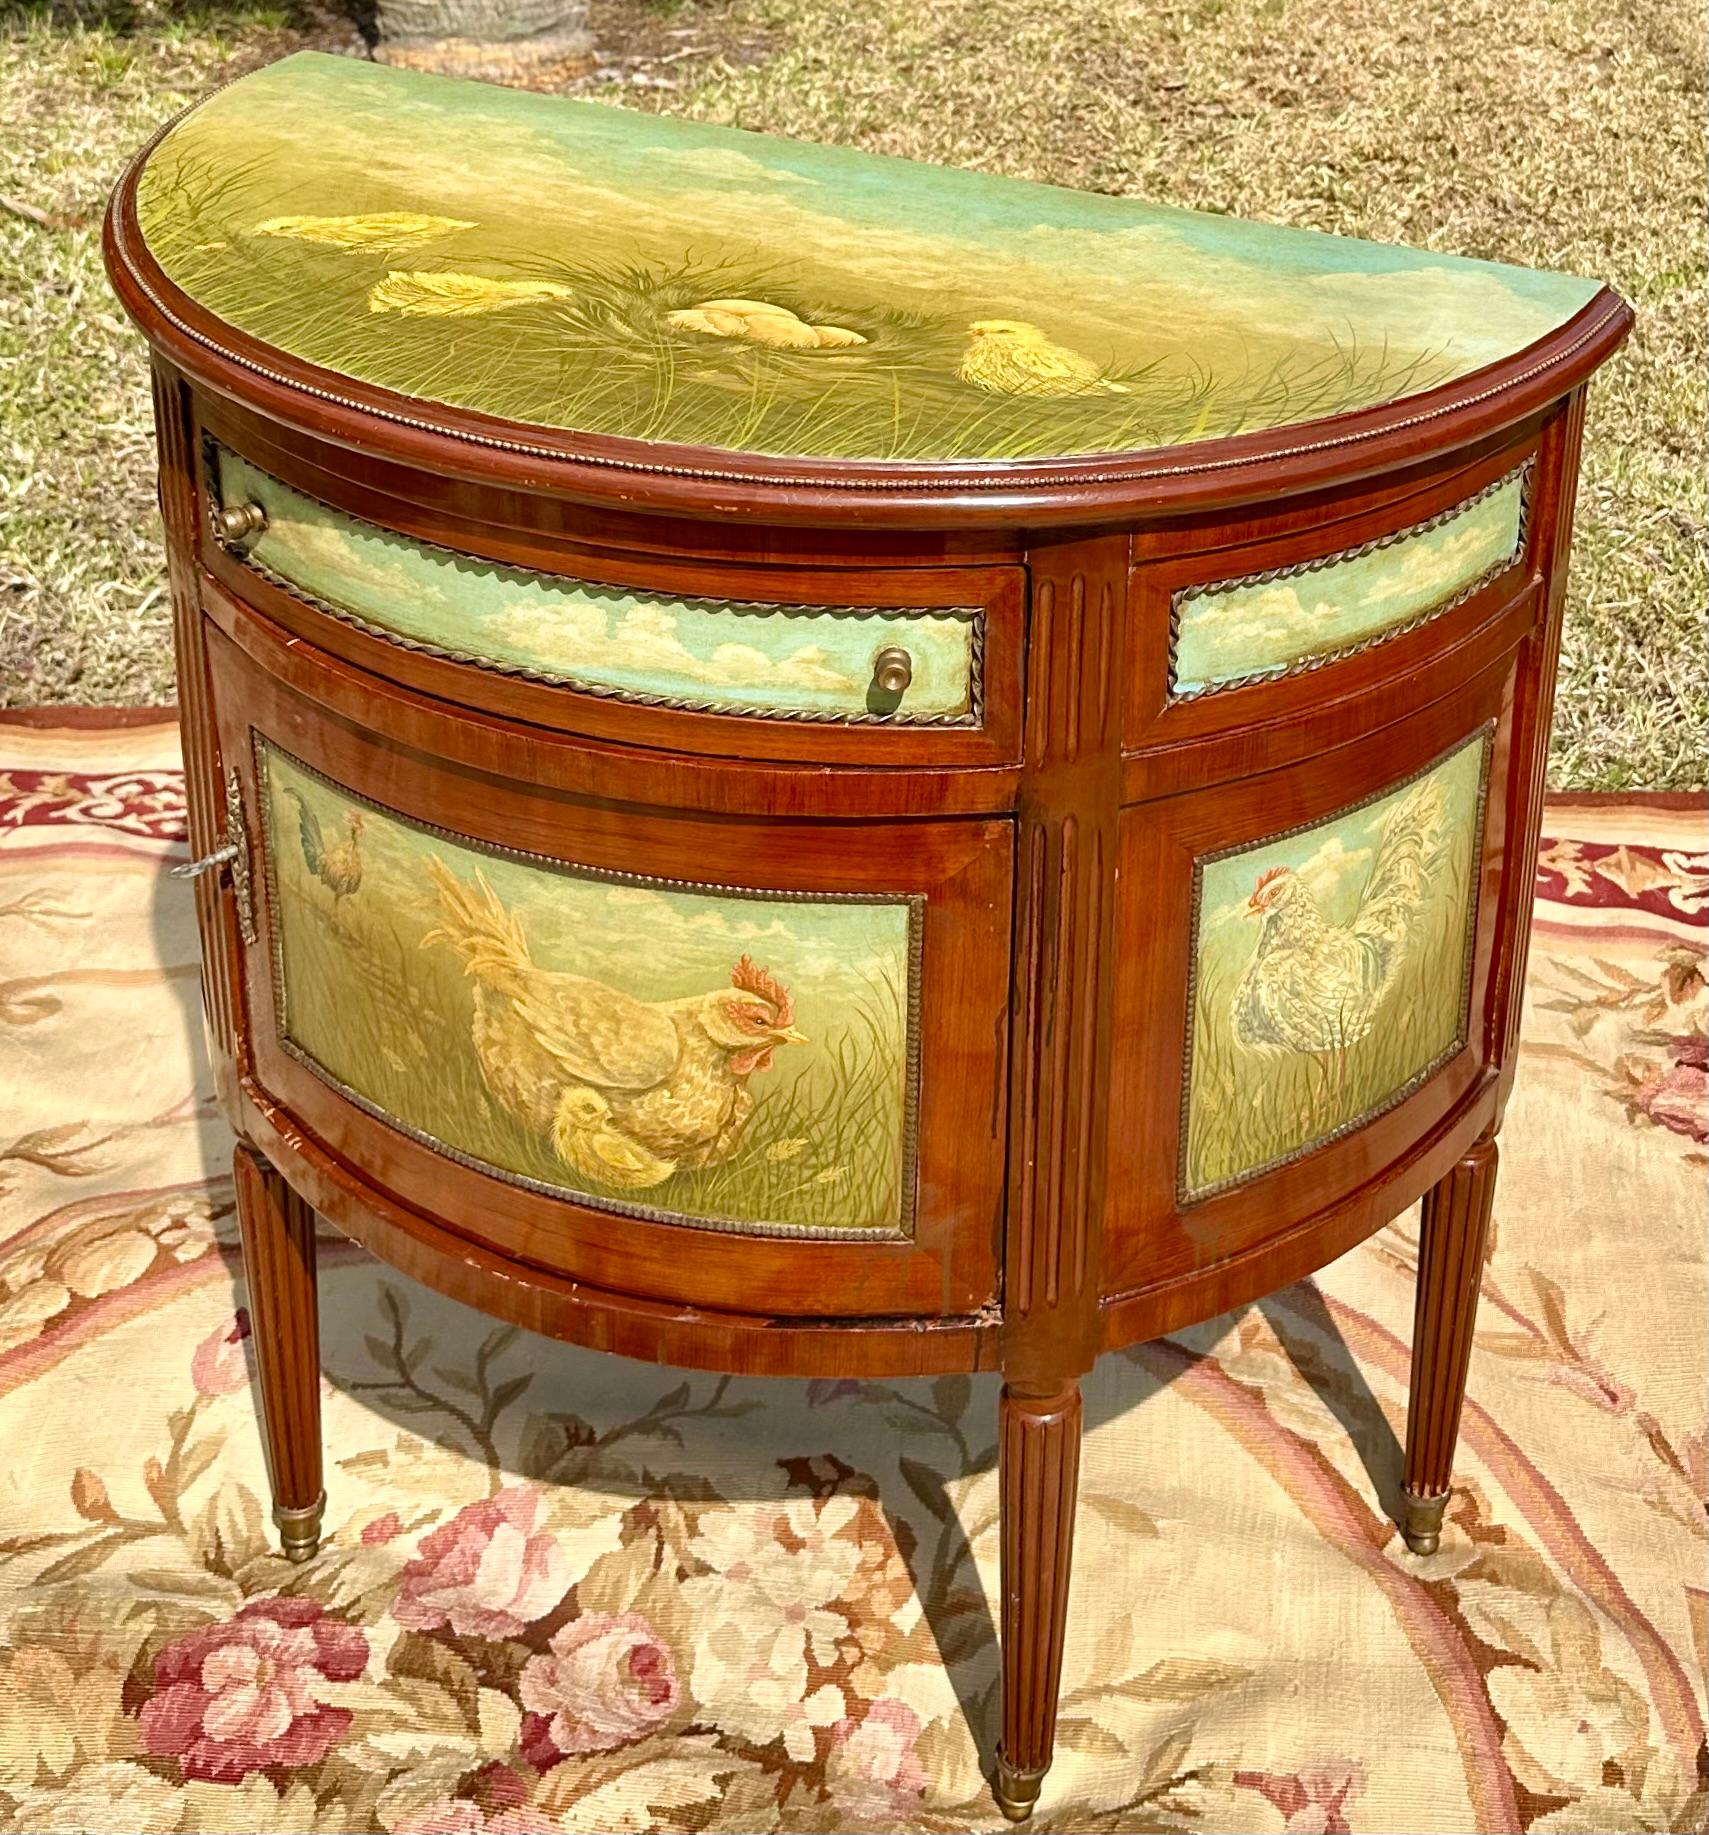 Painted Demilune Cabinet Commode Console

Absolutely gorgeous demilune hand painted cabinet console with upper drawer. It is decorated with the most charming paintings of chicks, hens and roosters on top and on all sides. The cabinet is raised on